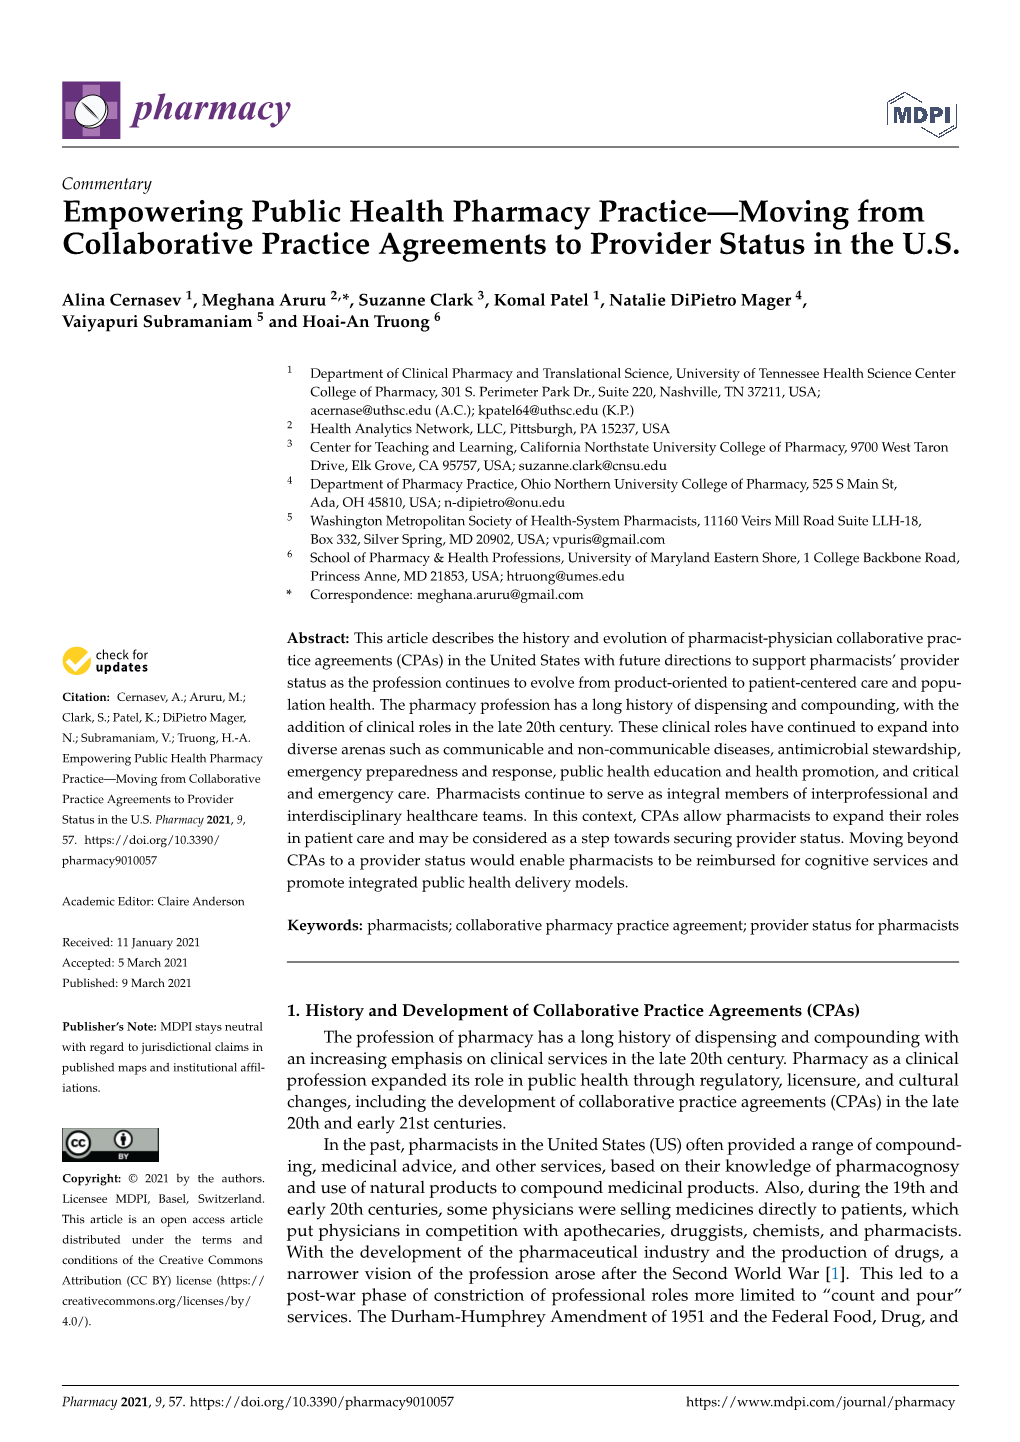 Empowering Public Health Pharmacy Practice—Moving from Collaborative Practice Agreements to Provider Status in the U.S